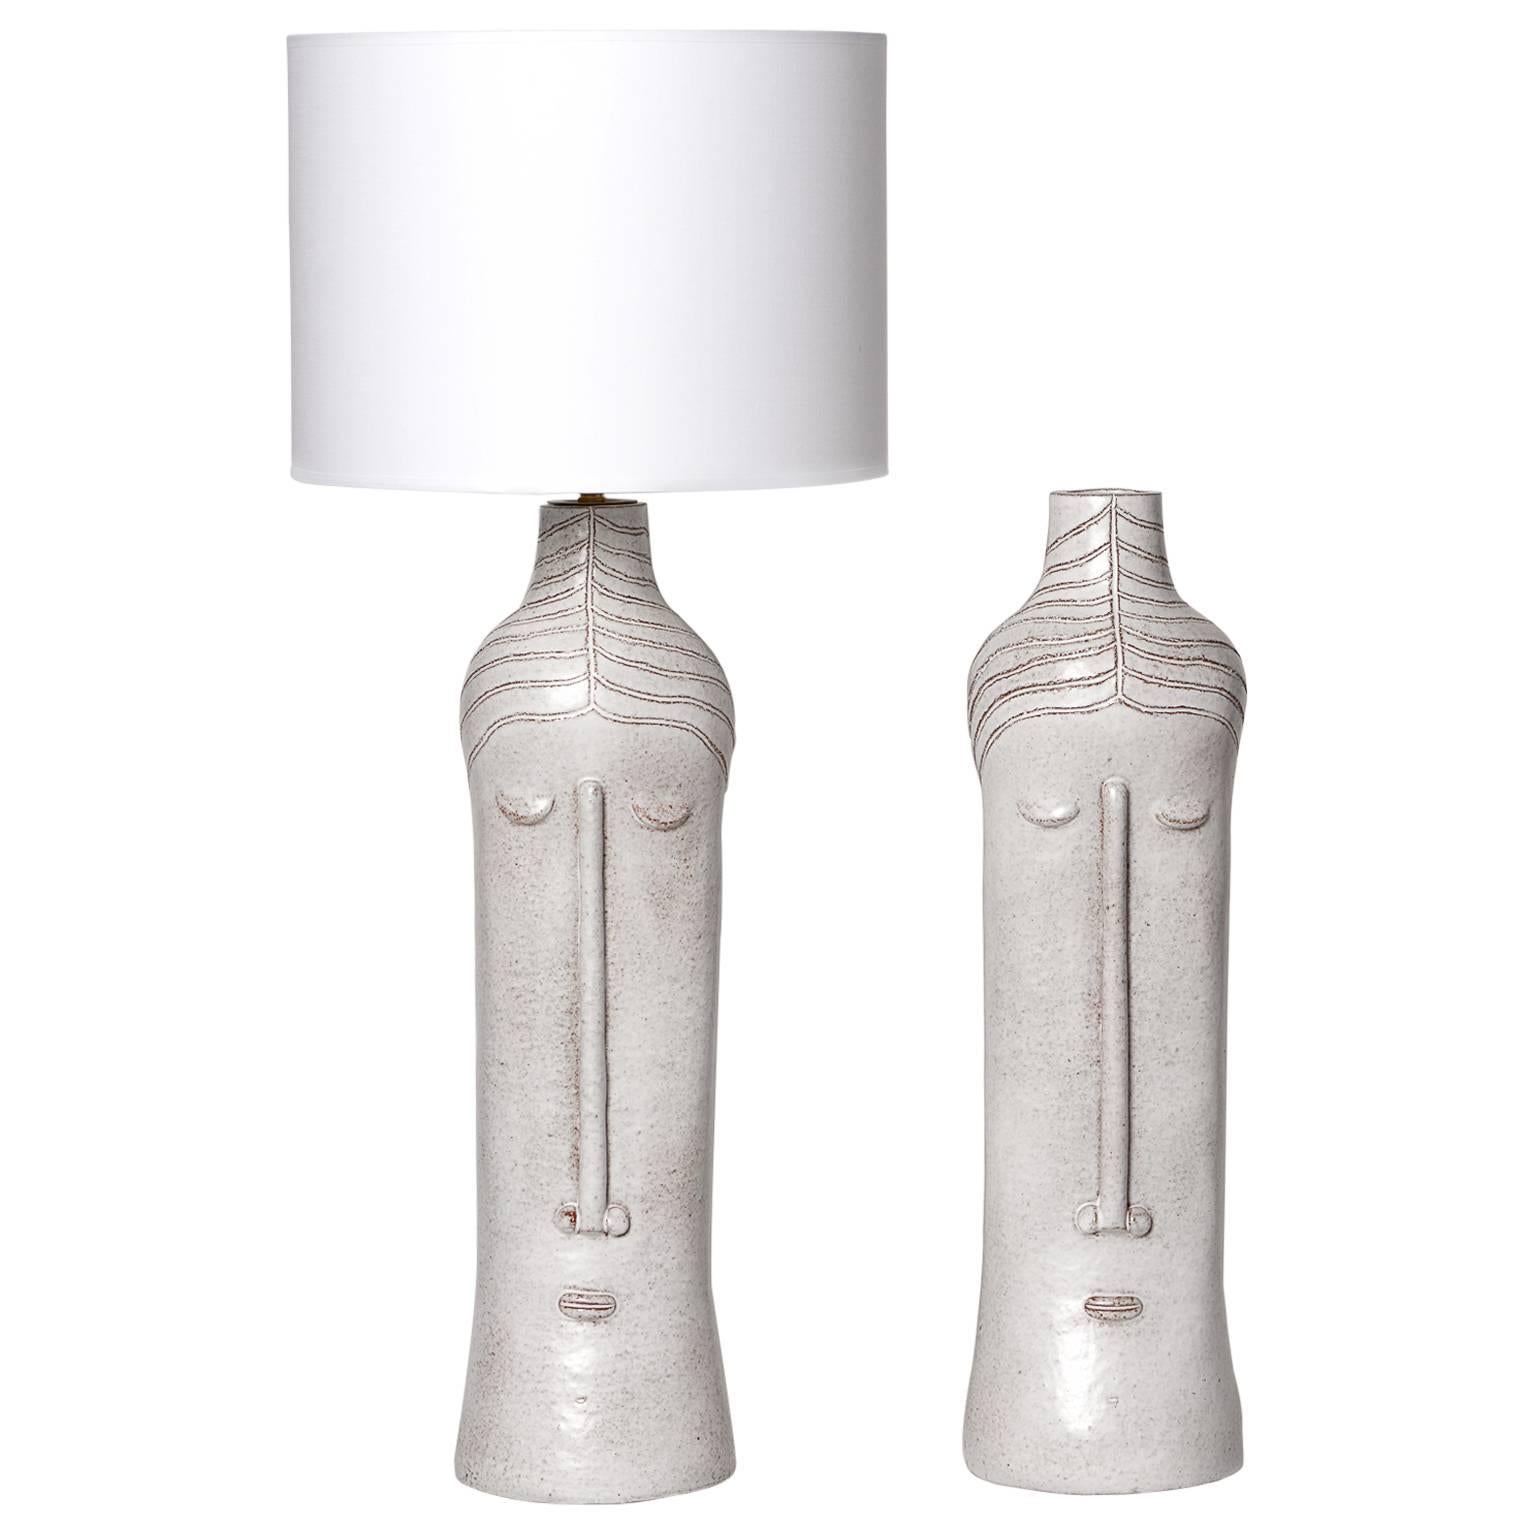 Pair of Ceramic Lamp Bases with Stylized Faces, Unique Piece by Dalo